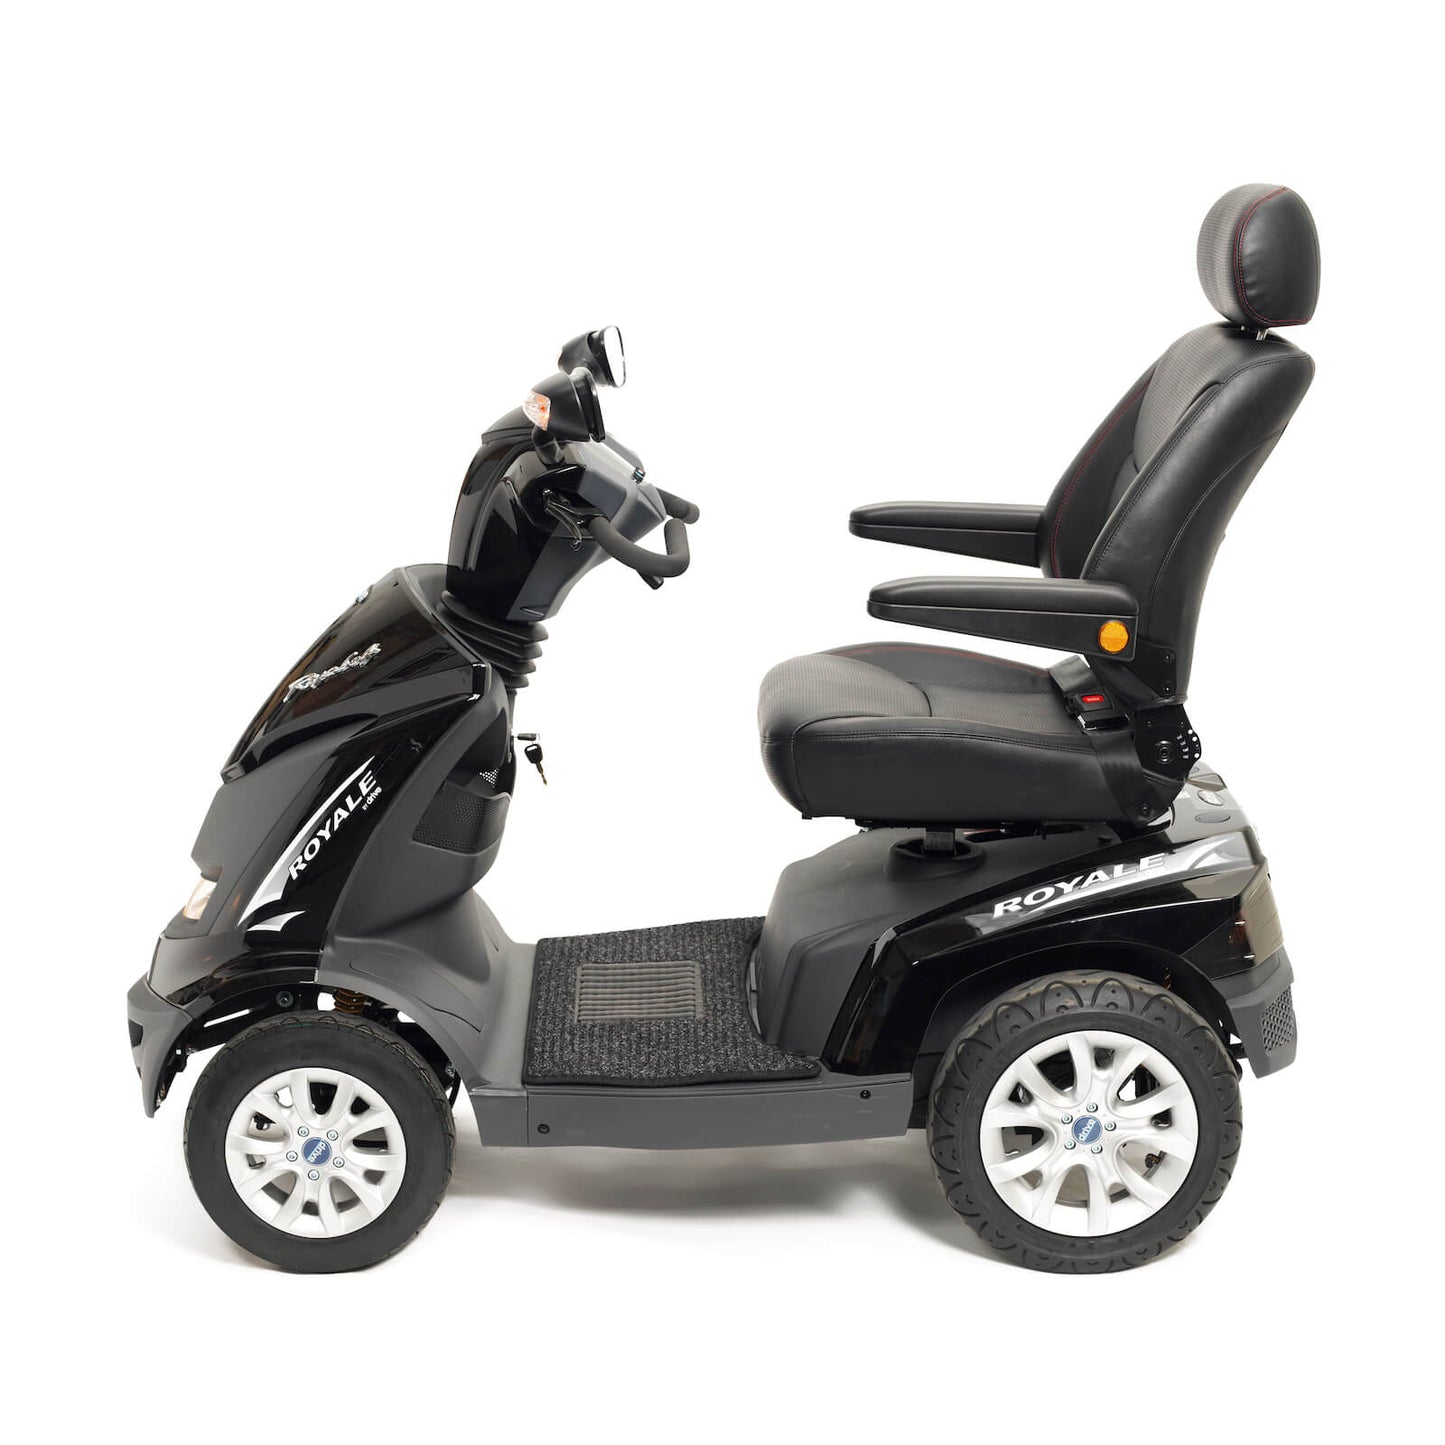 Royale 4 - 8 mph Mobility Scooter